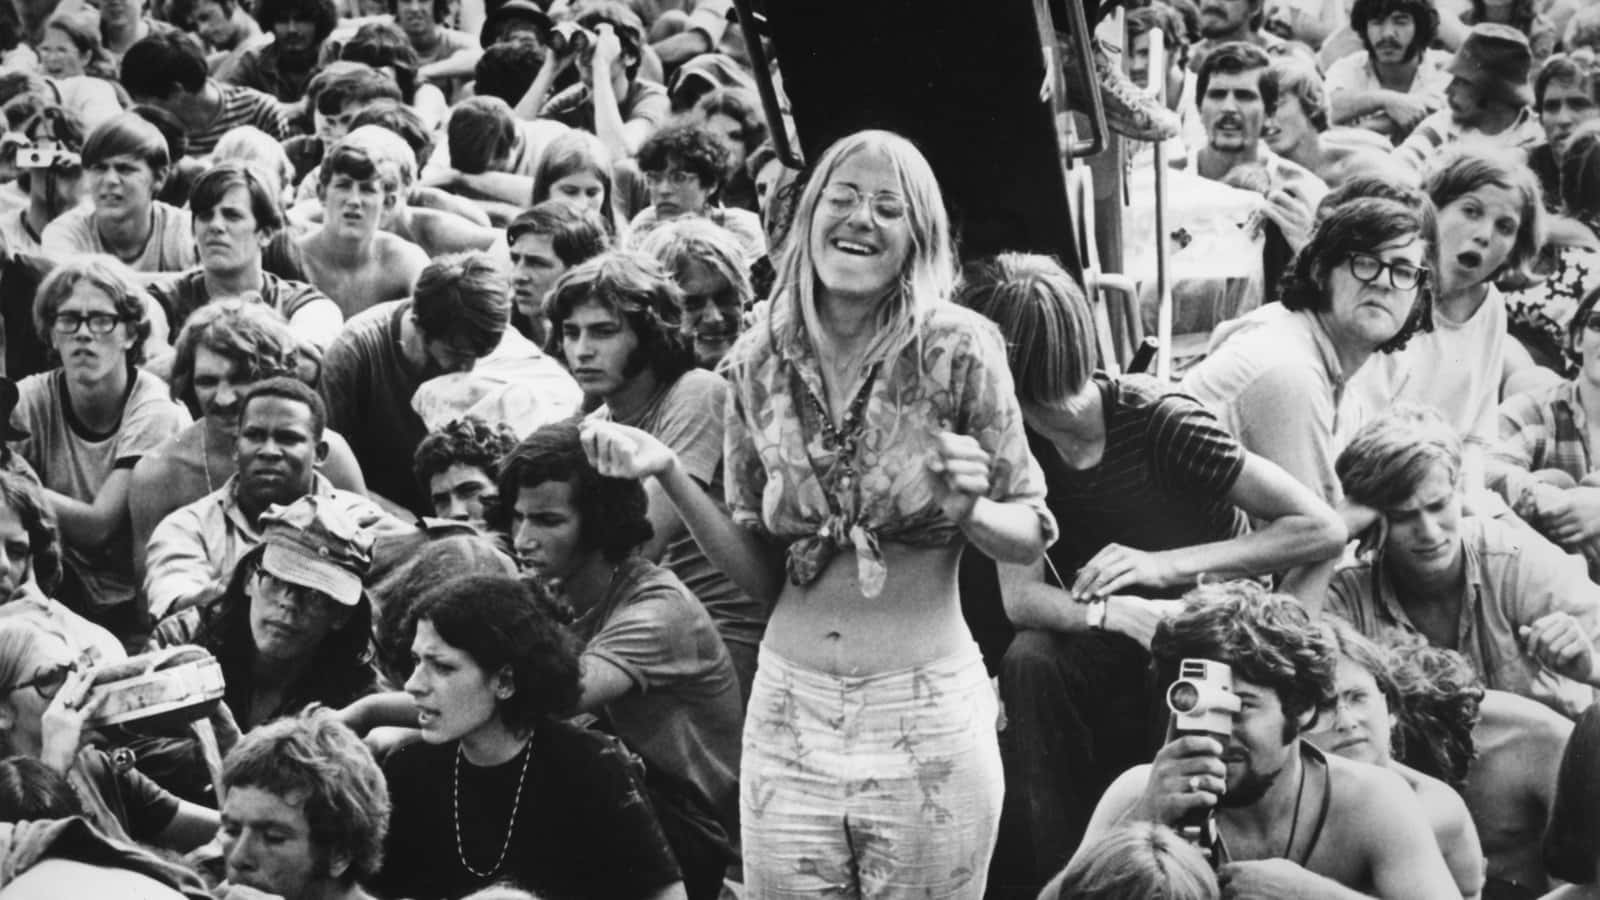 An iconic view of Woodstock in 1969